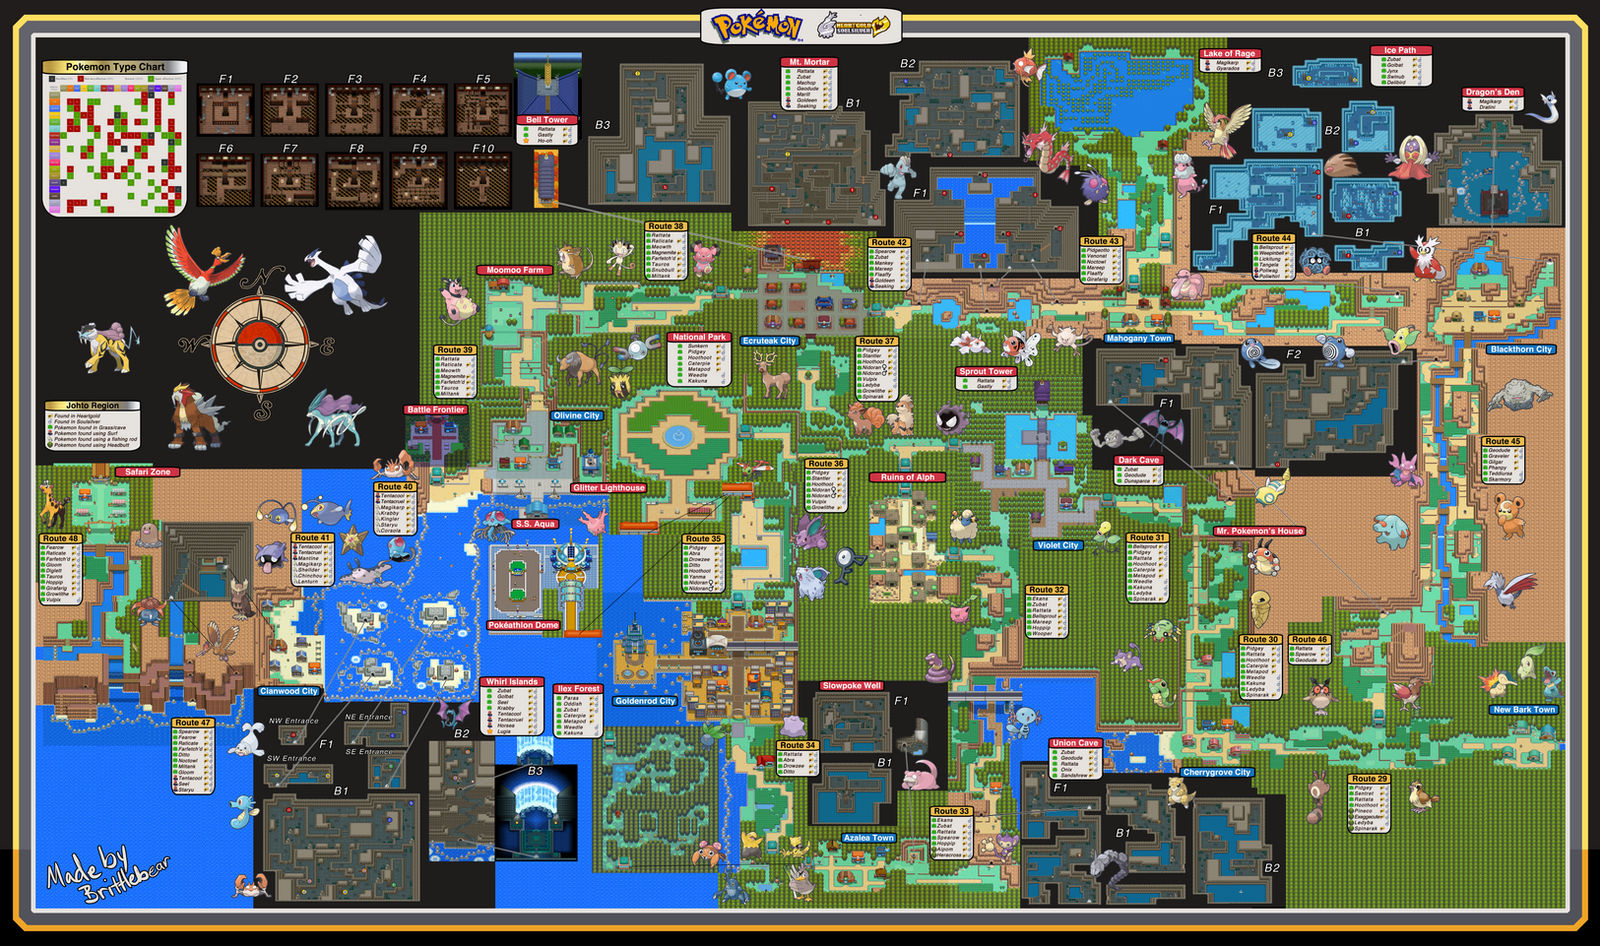 Raving Rabbids Travel in Time / Pokémon HeartGold and SoulSilver Map Poster